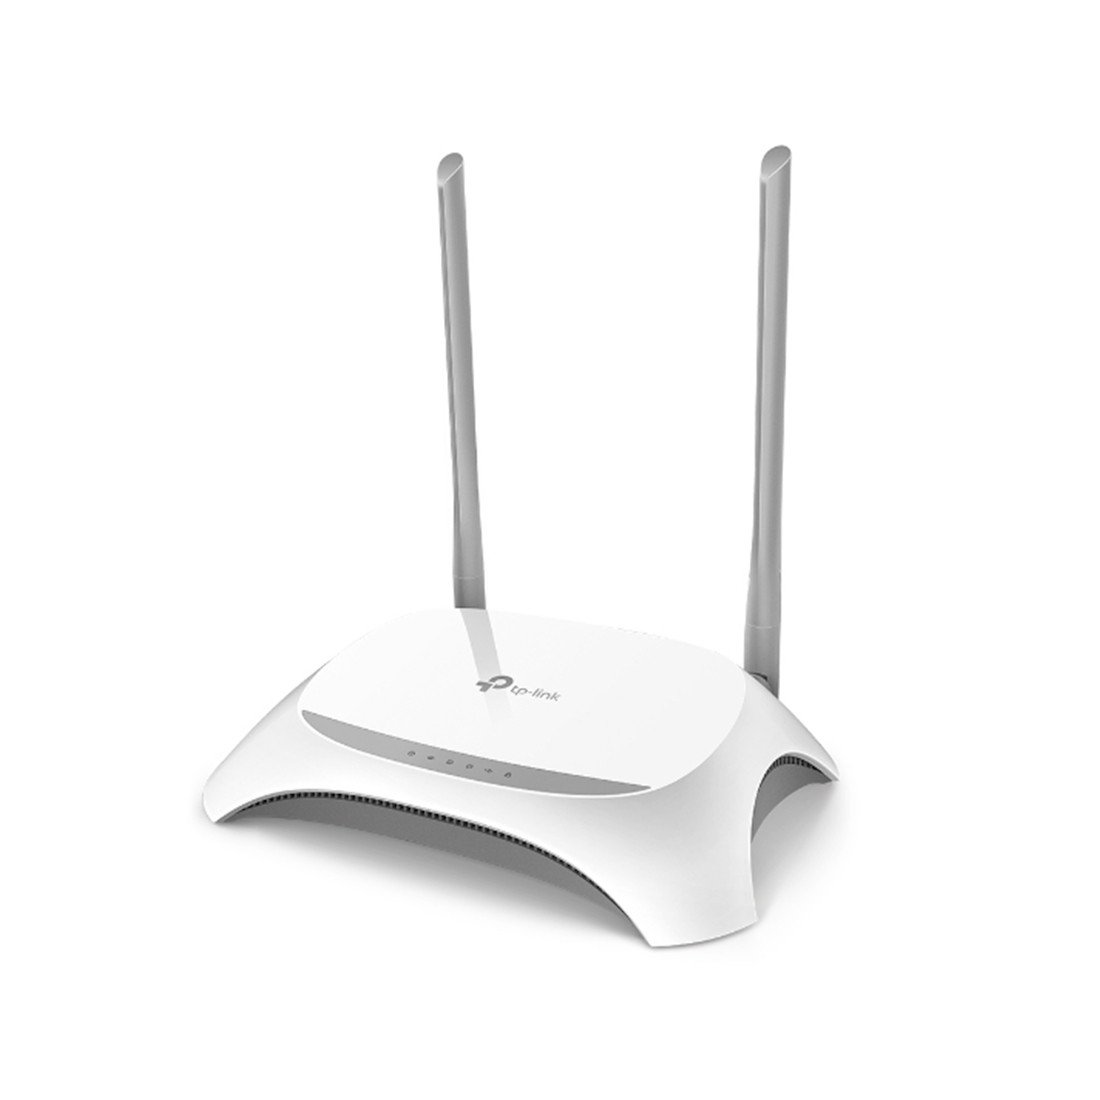 Маршрутизатор, TP-Link, TL-WR842N, 300 Мбит/с, 4 порта LAN 10/100 Мбит/с, 1 порт WAN 10/100 Мбит/с, 1 порт USB - фото 1 - id-p113449761